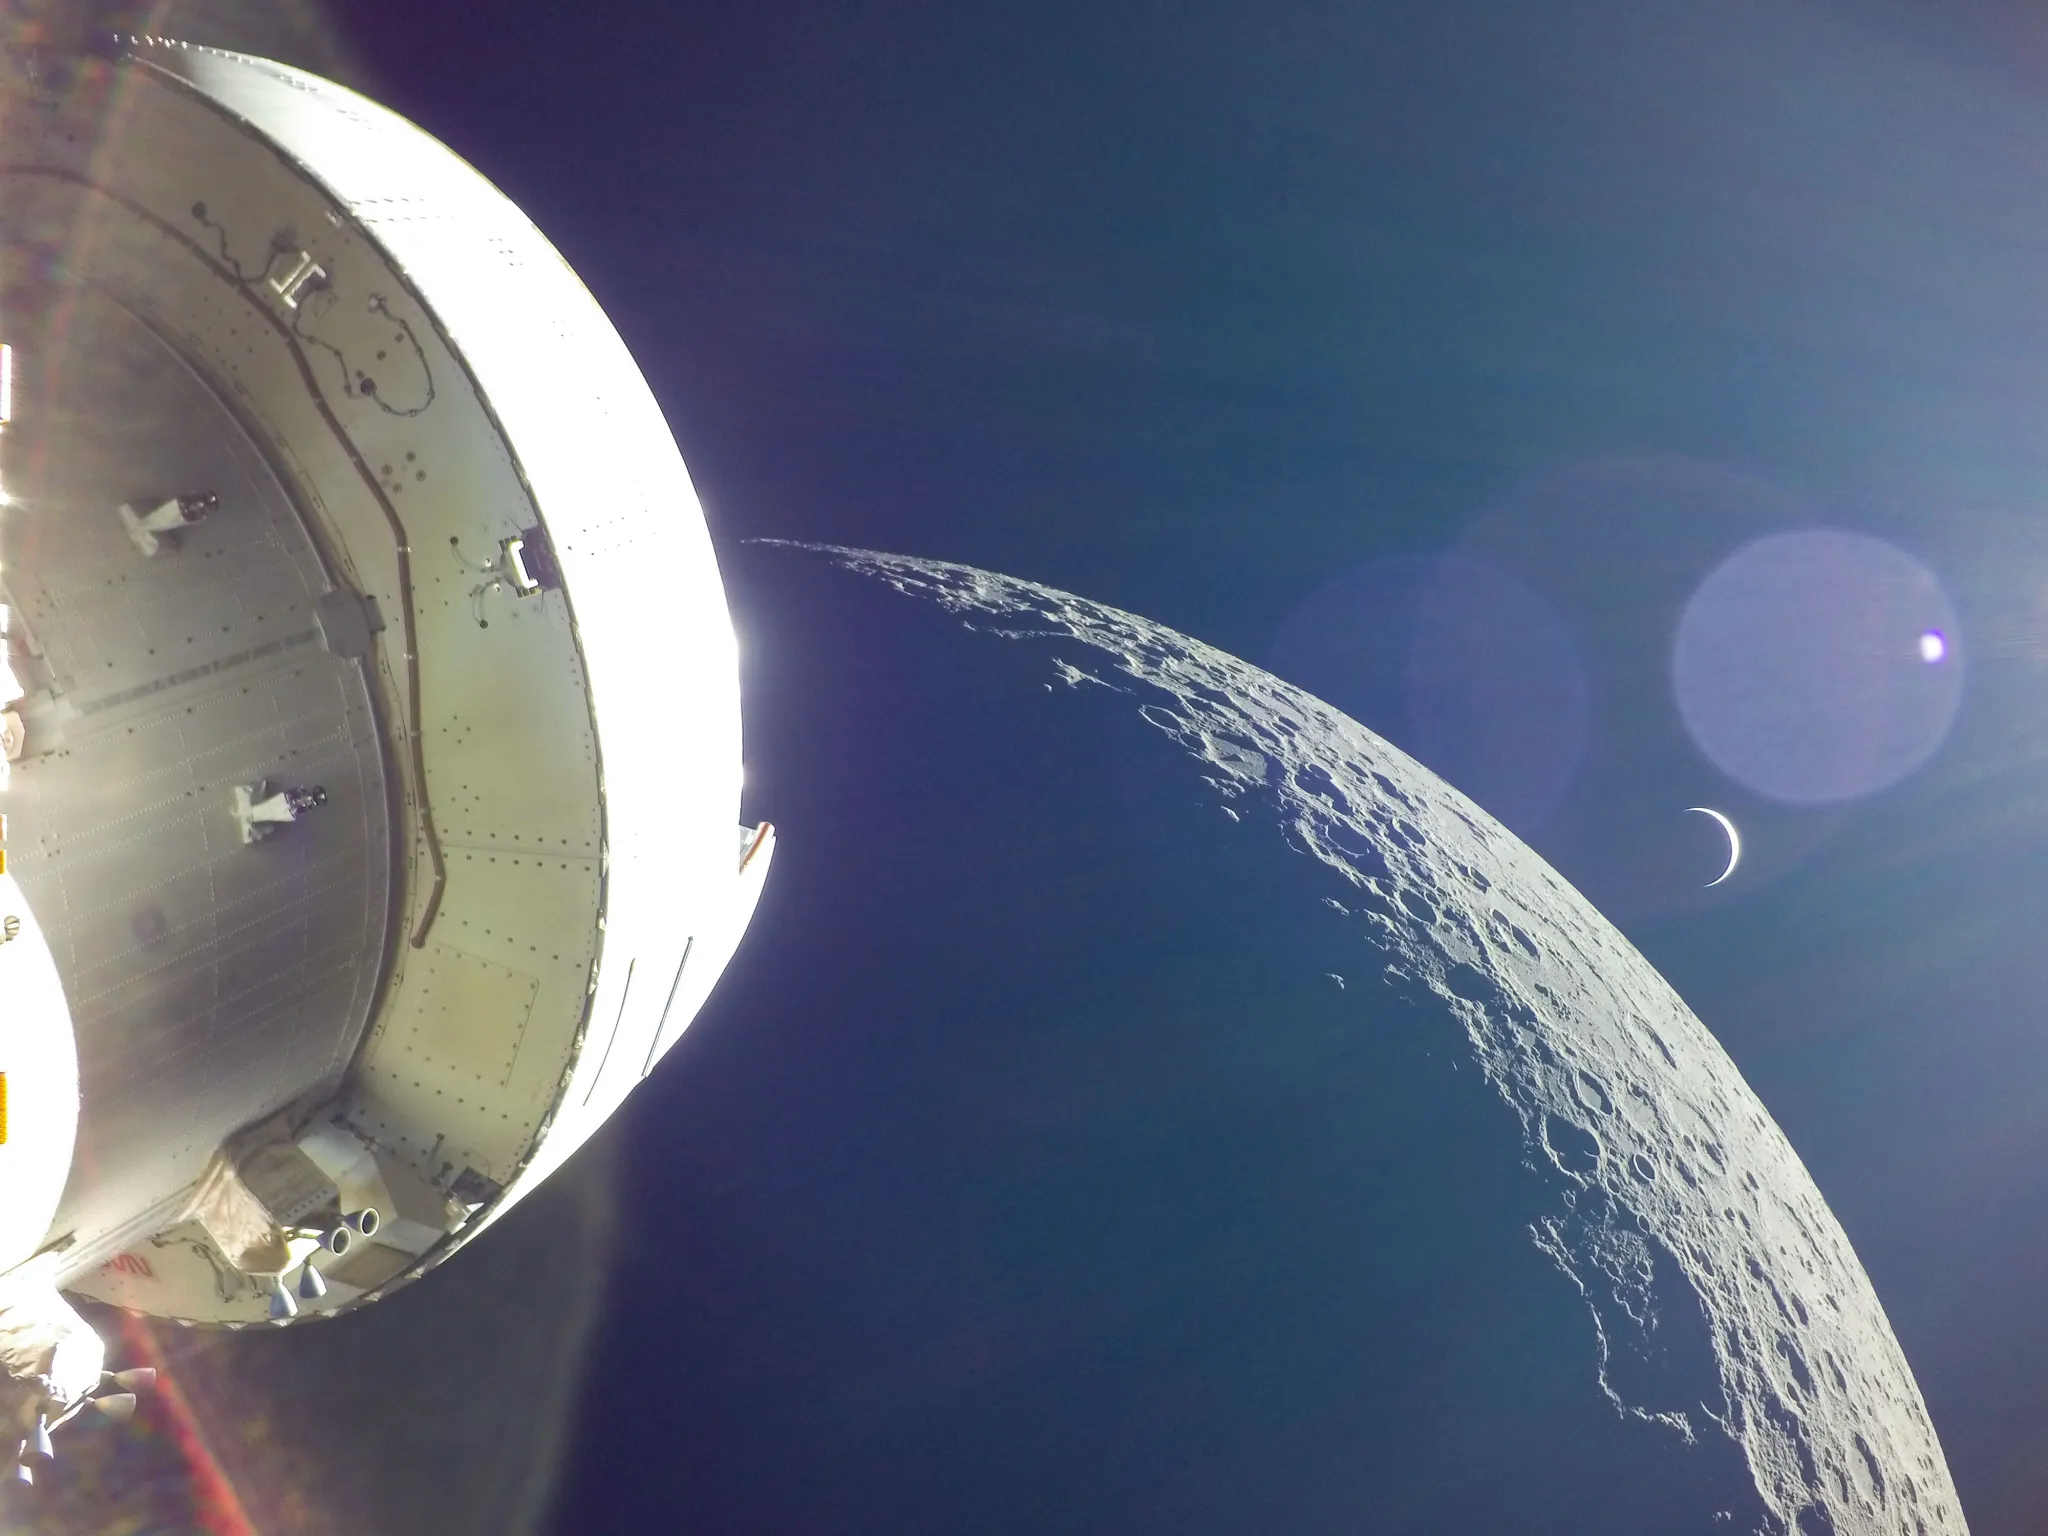 'Safety is our top priority' NASA delays Artemis Mission until 2025